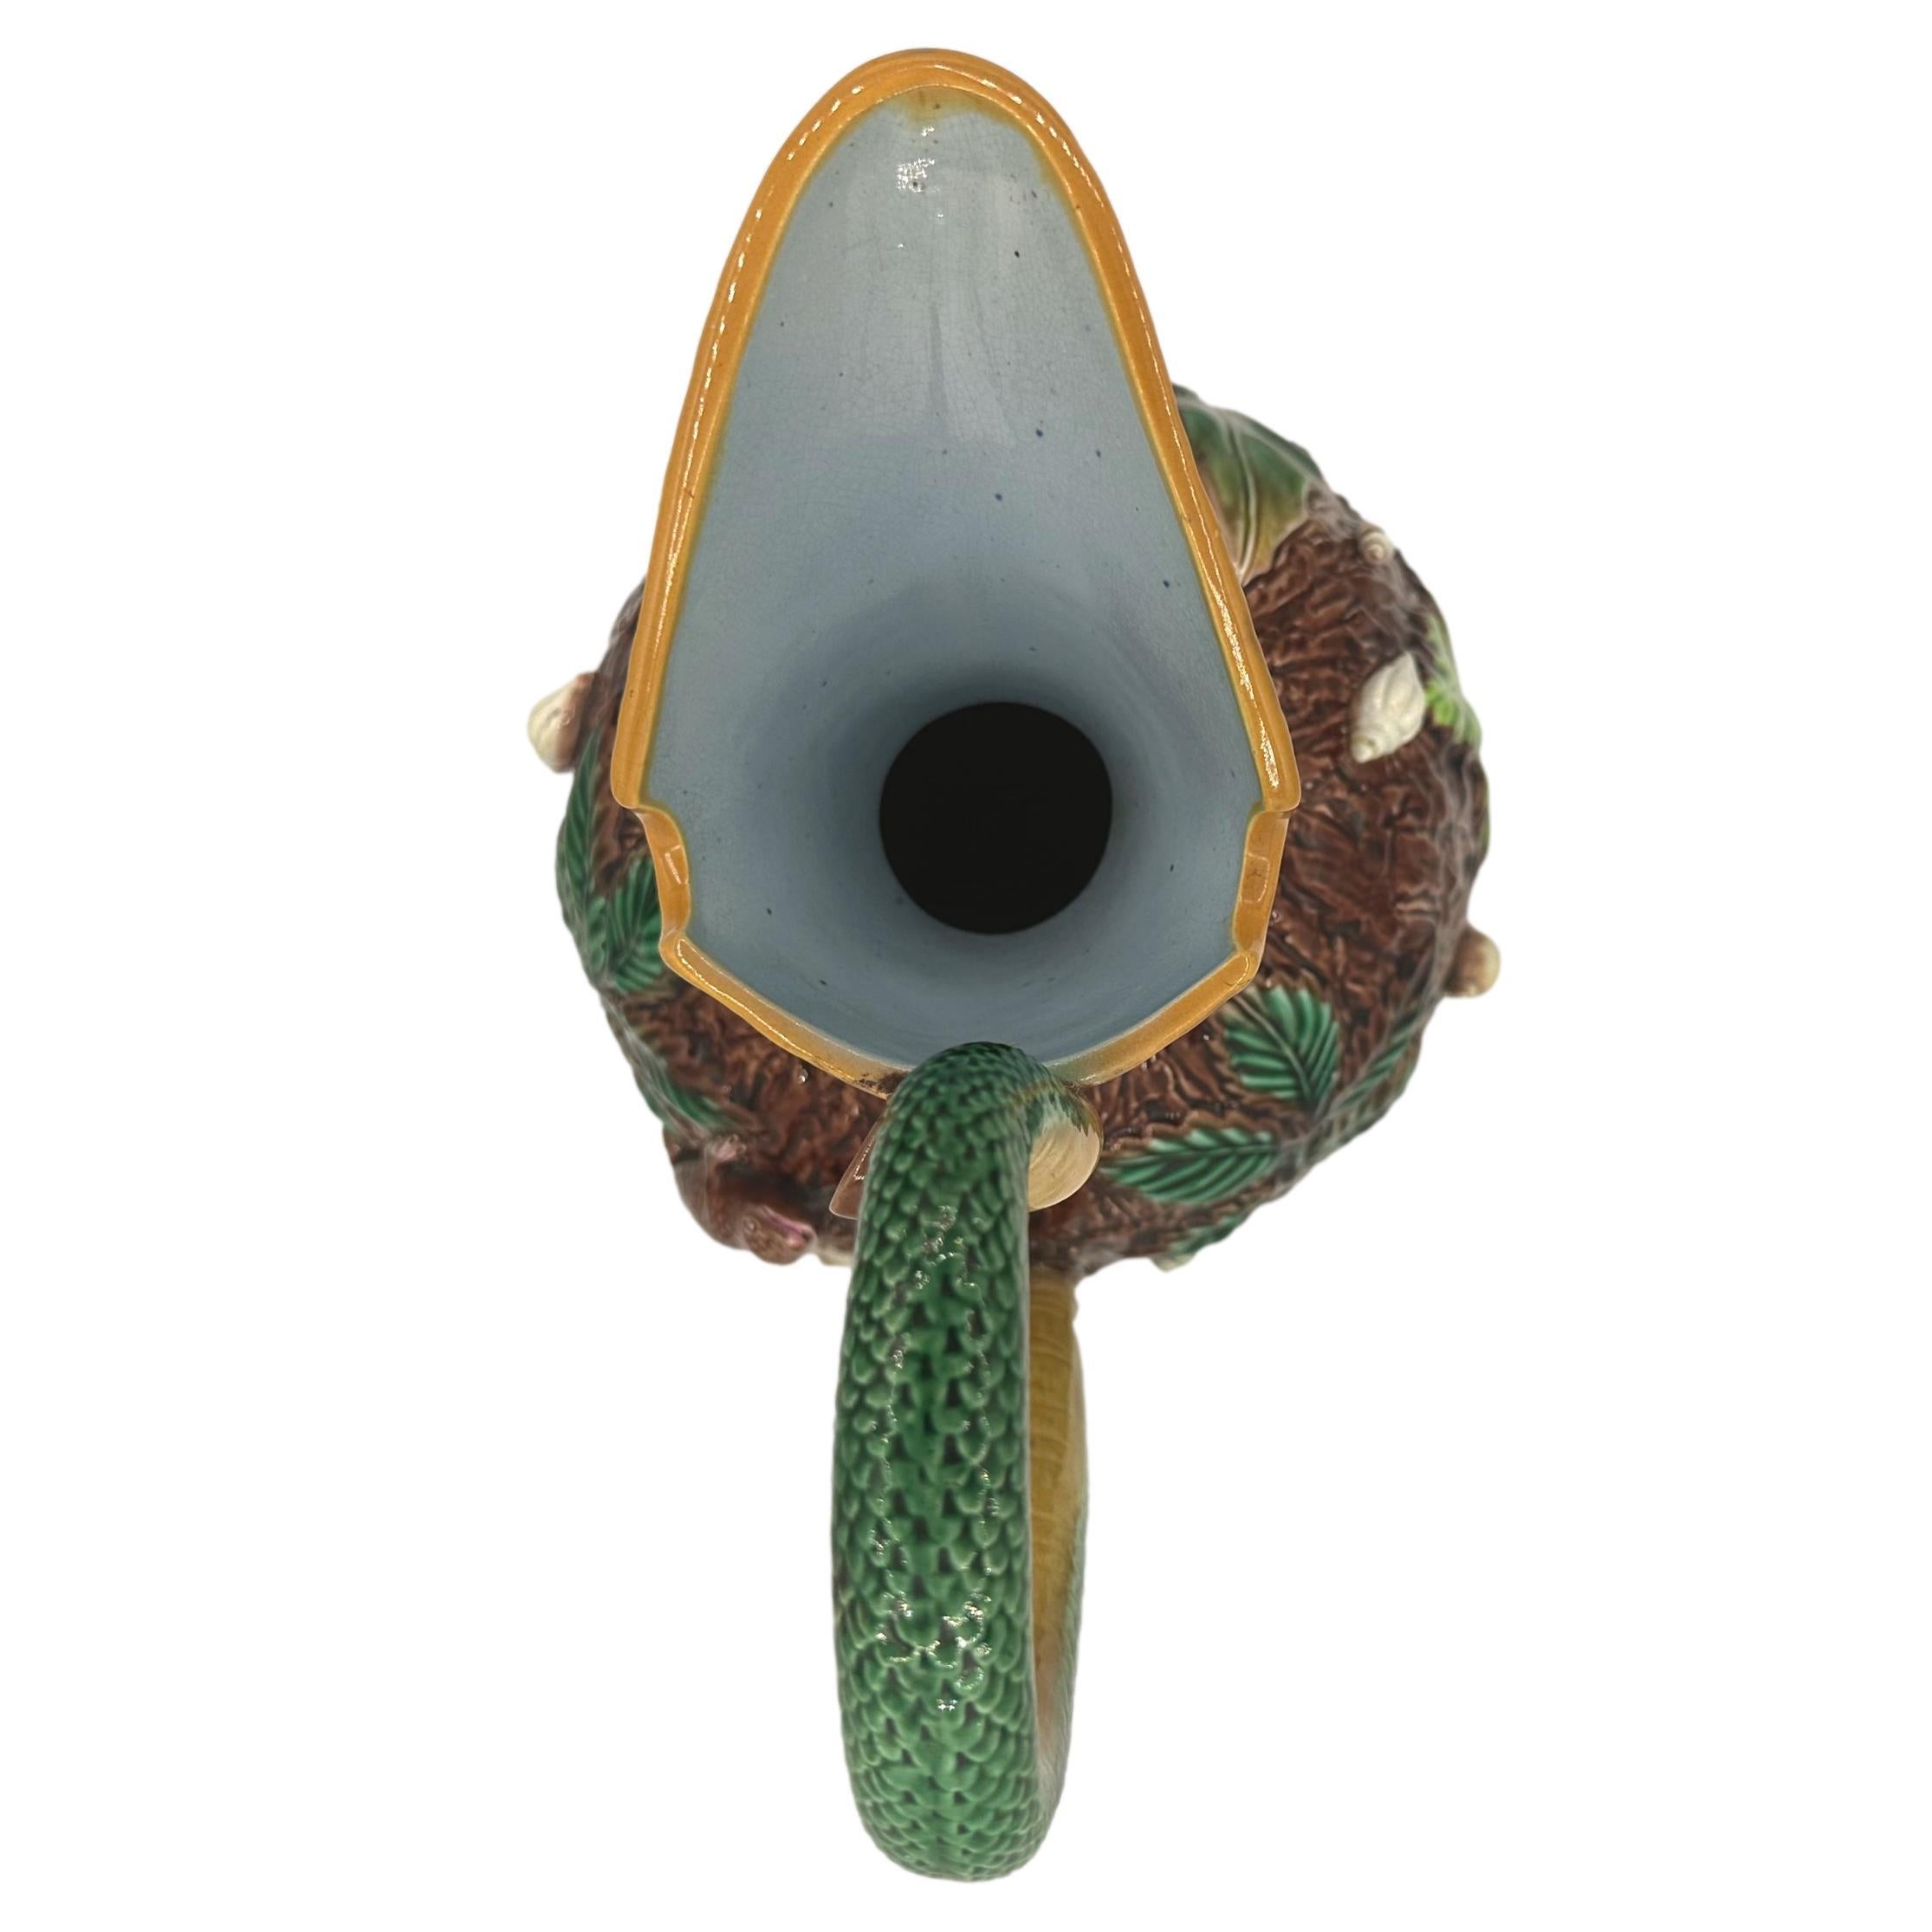 A George Jones Majolica 'Palissy Vase' with Snake Handle, English, ca. 1870 For Sale 12